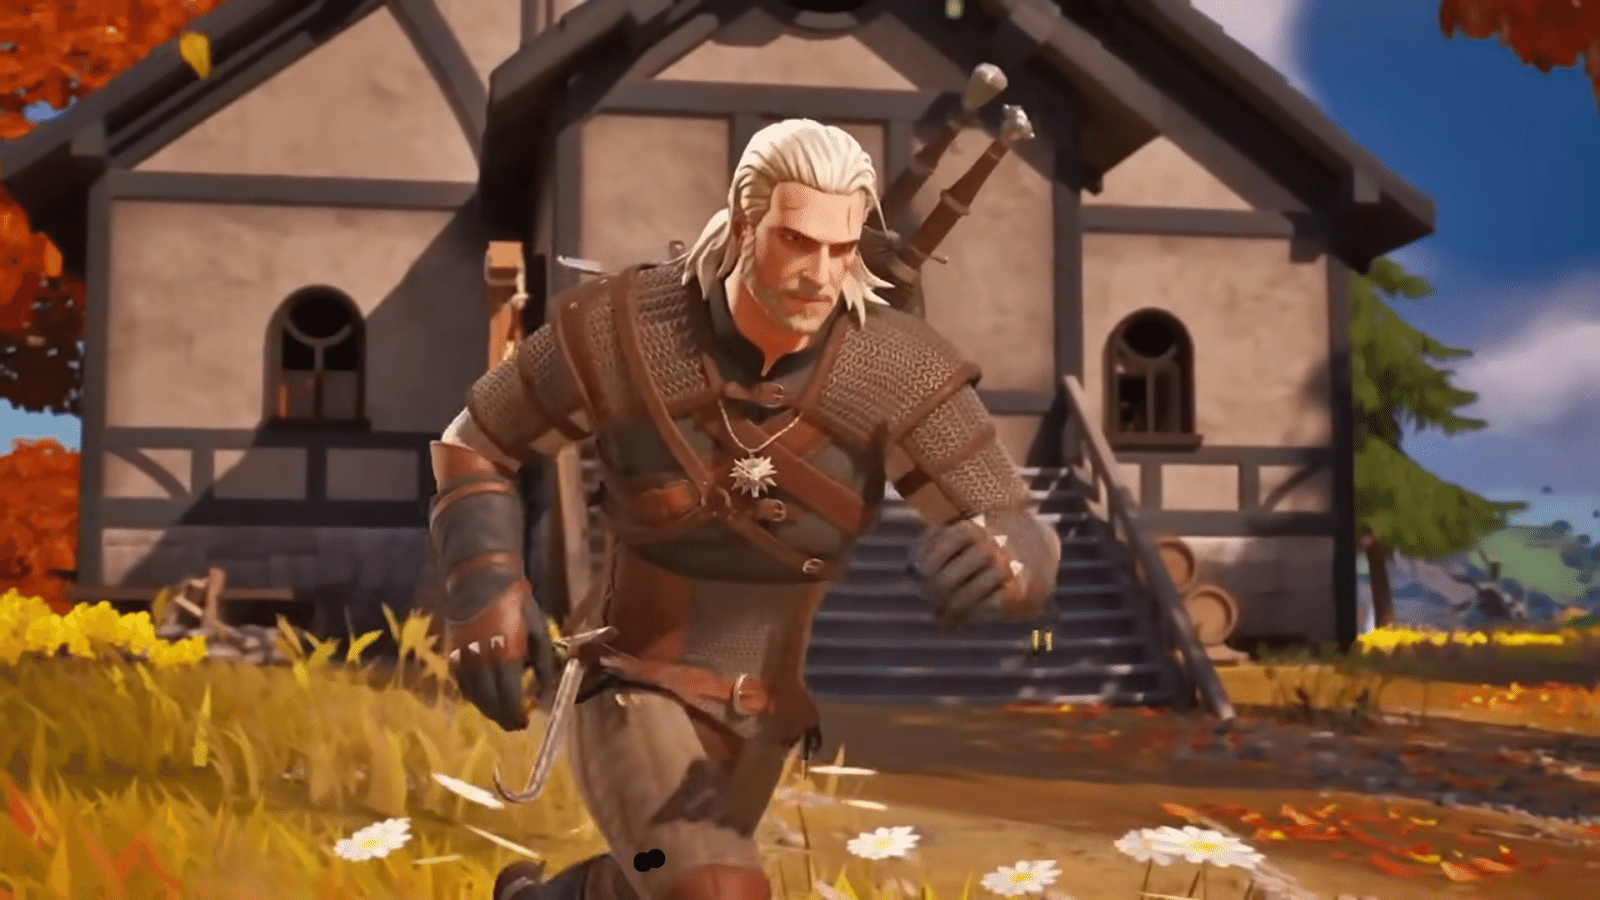 The Witcher joins Fortnite